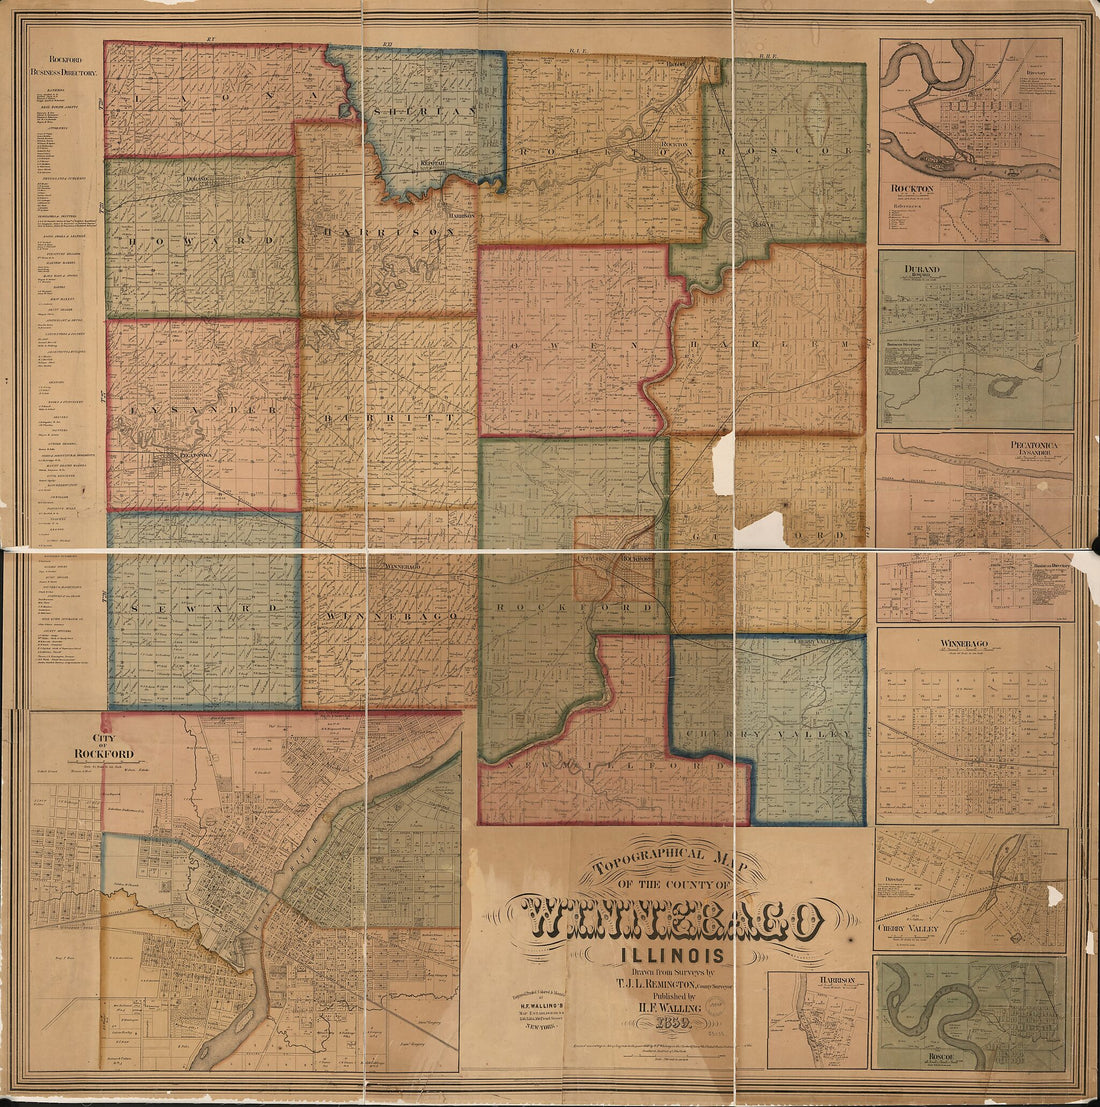 This old map of Topographical Map of the County of Winnebago, Illinois from 1864 was created by T. J. L. Remington, Henry Francis Walling in 1864